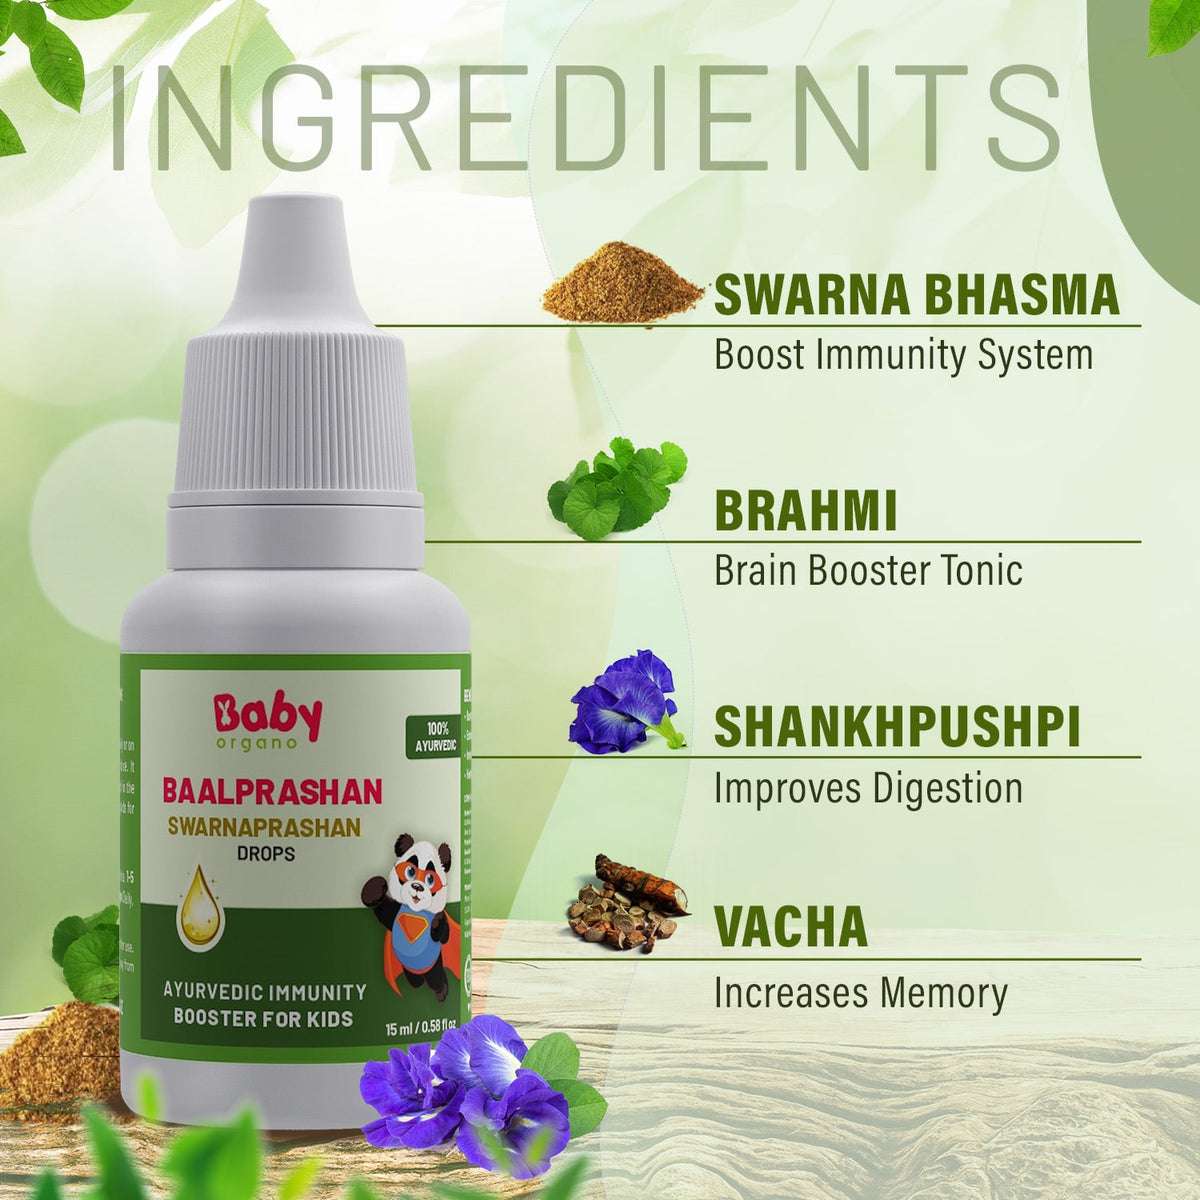 BabyOrgano Suvarnaprashan Drops | SwarnaprashanDrops | Immunity booster for the kids | Contains 24ct Gold Ash for best Results